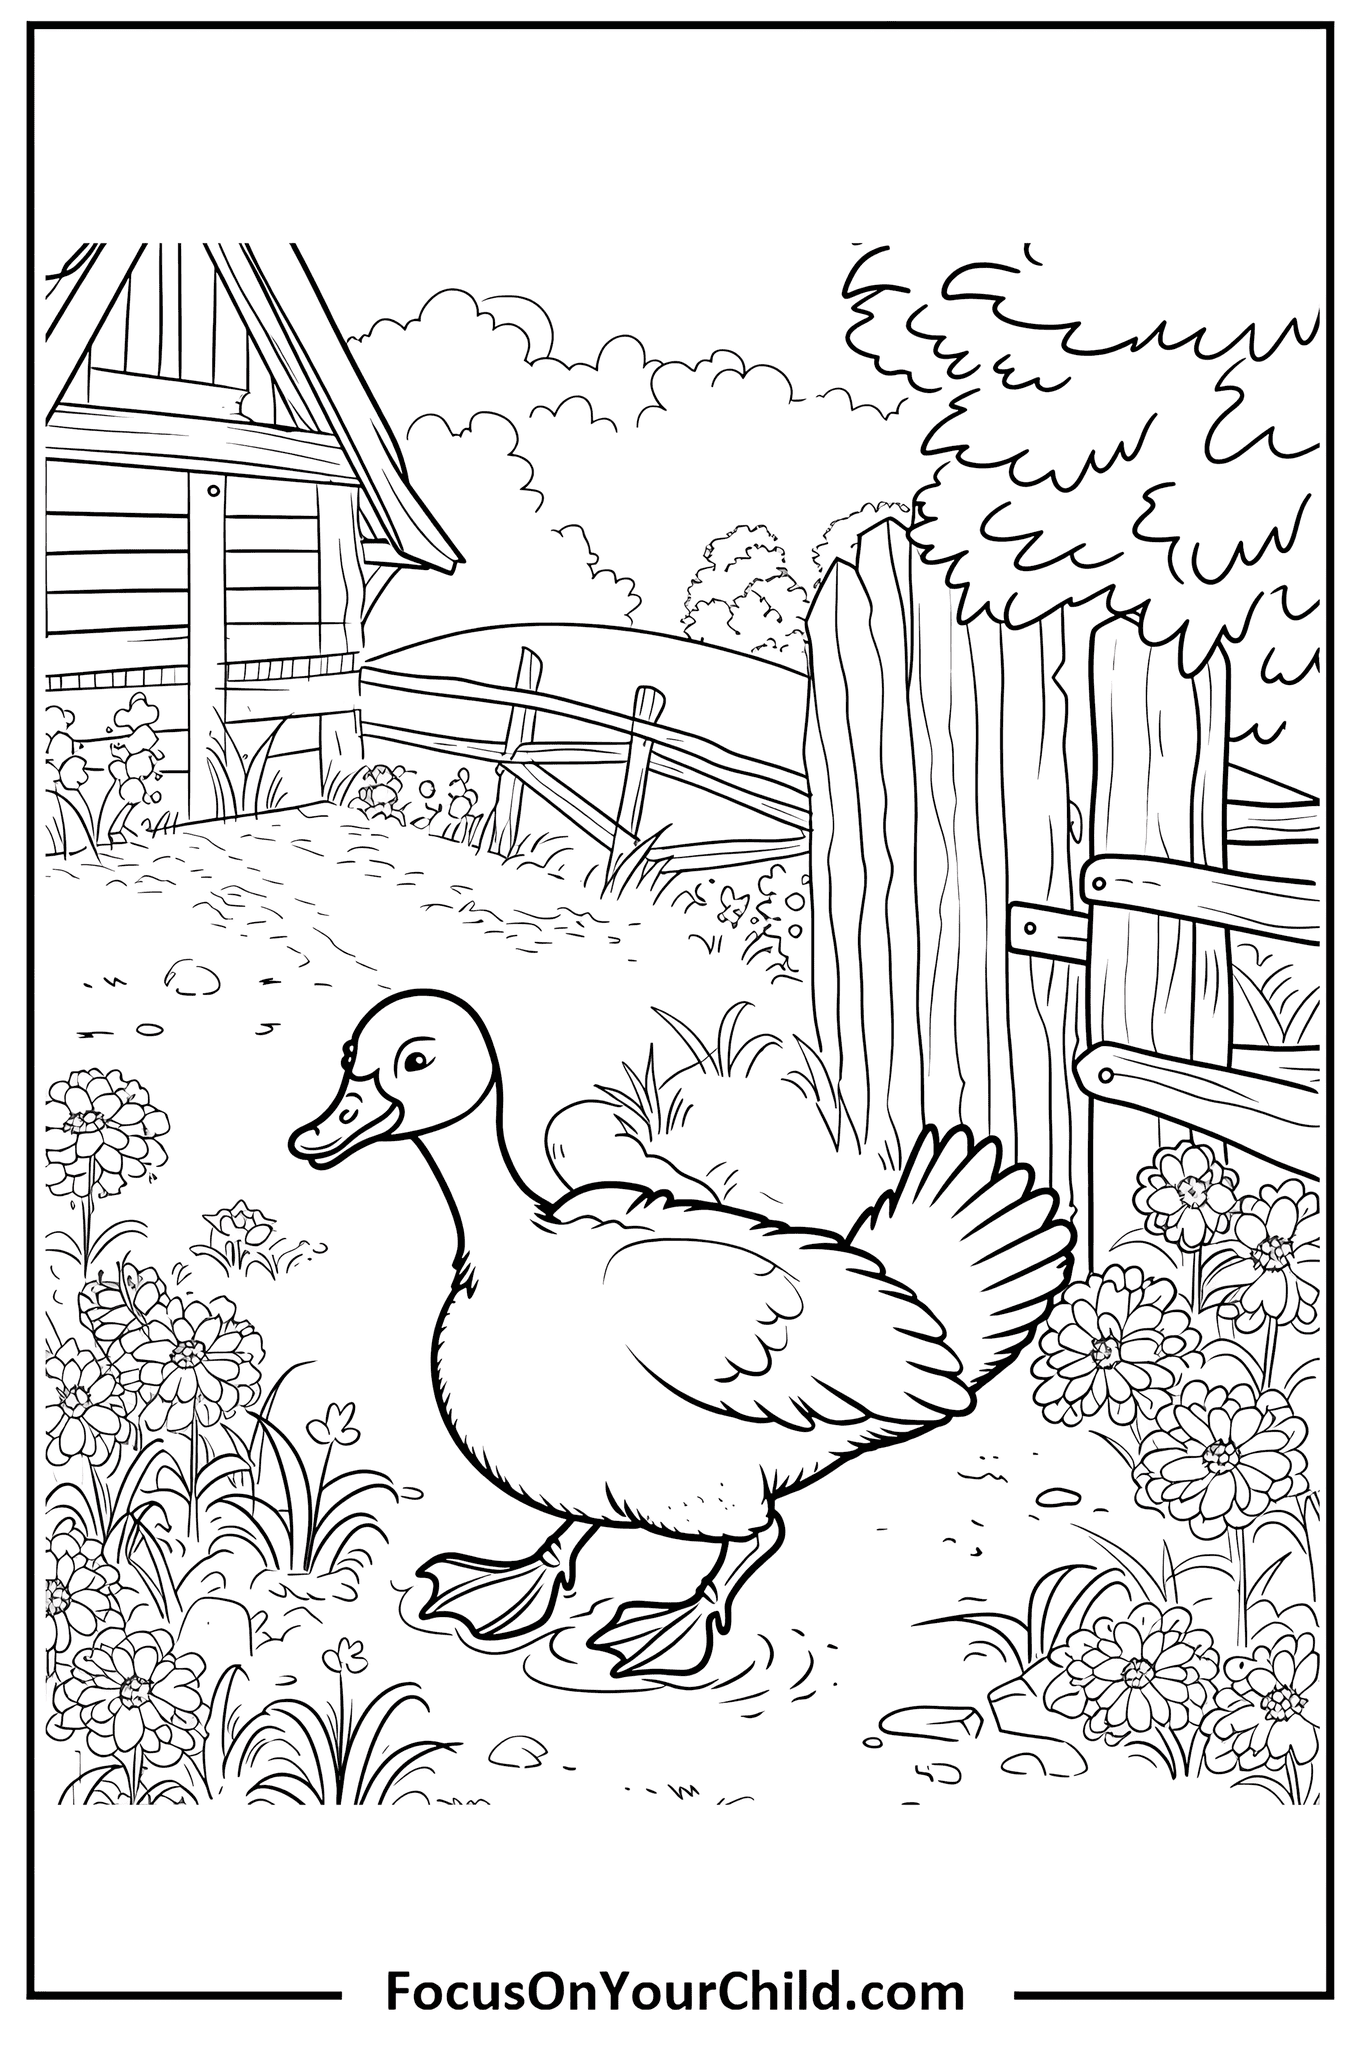 Friendly duck in a garden with barn, flowers, and broken fence under a sunny sky.